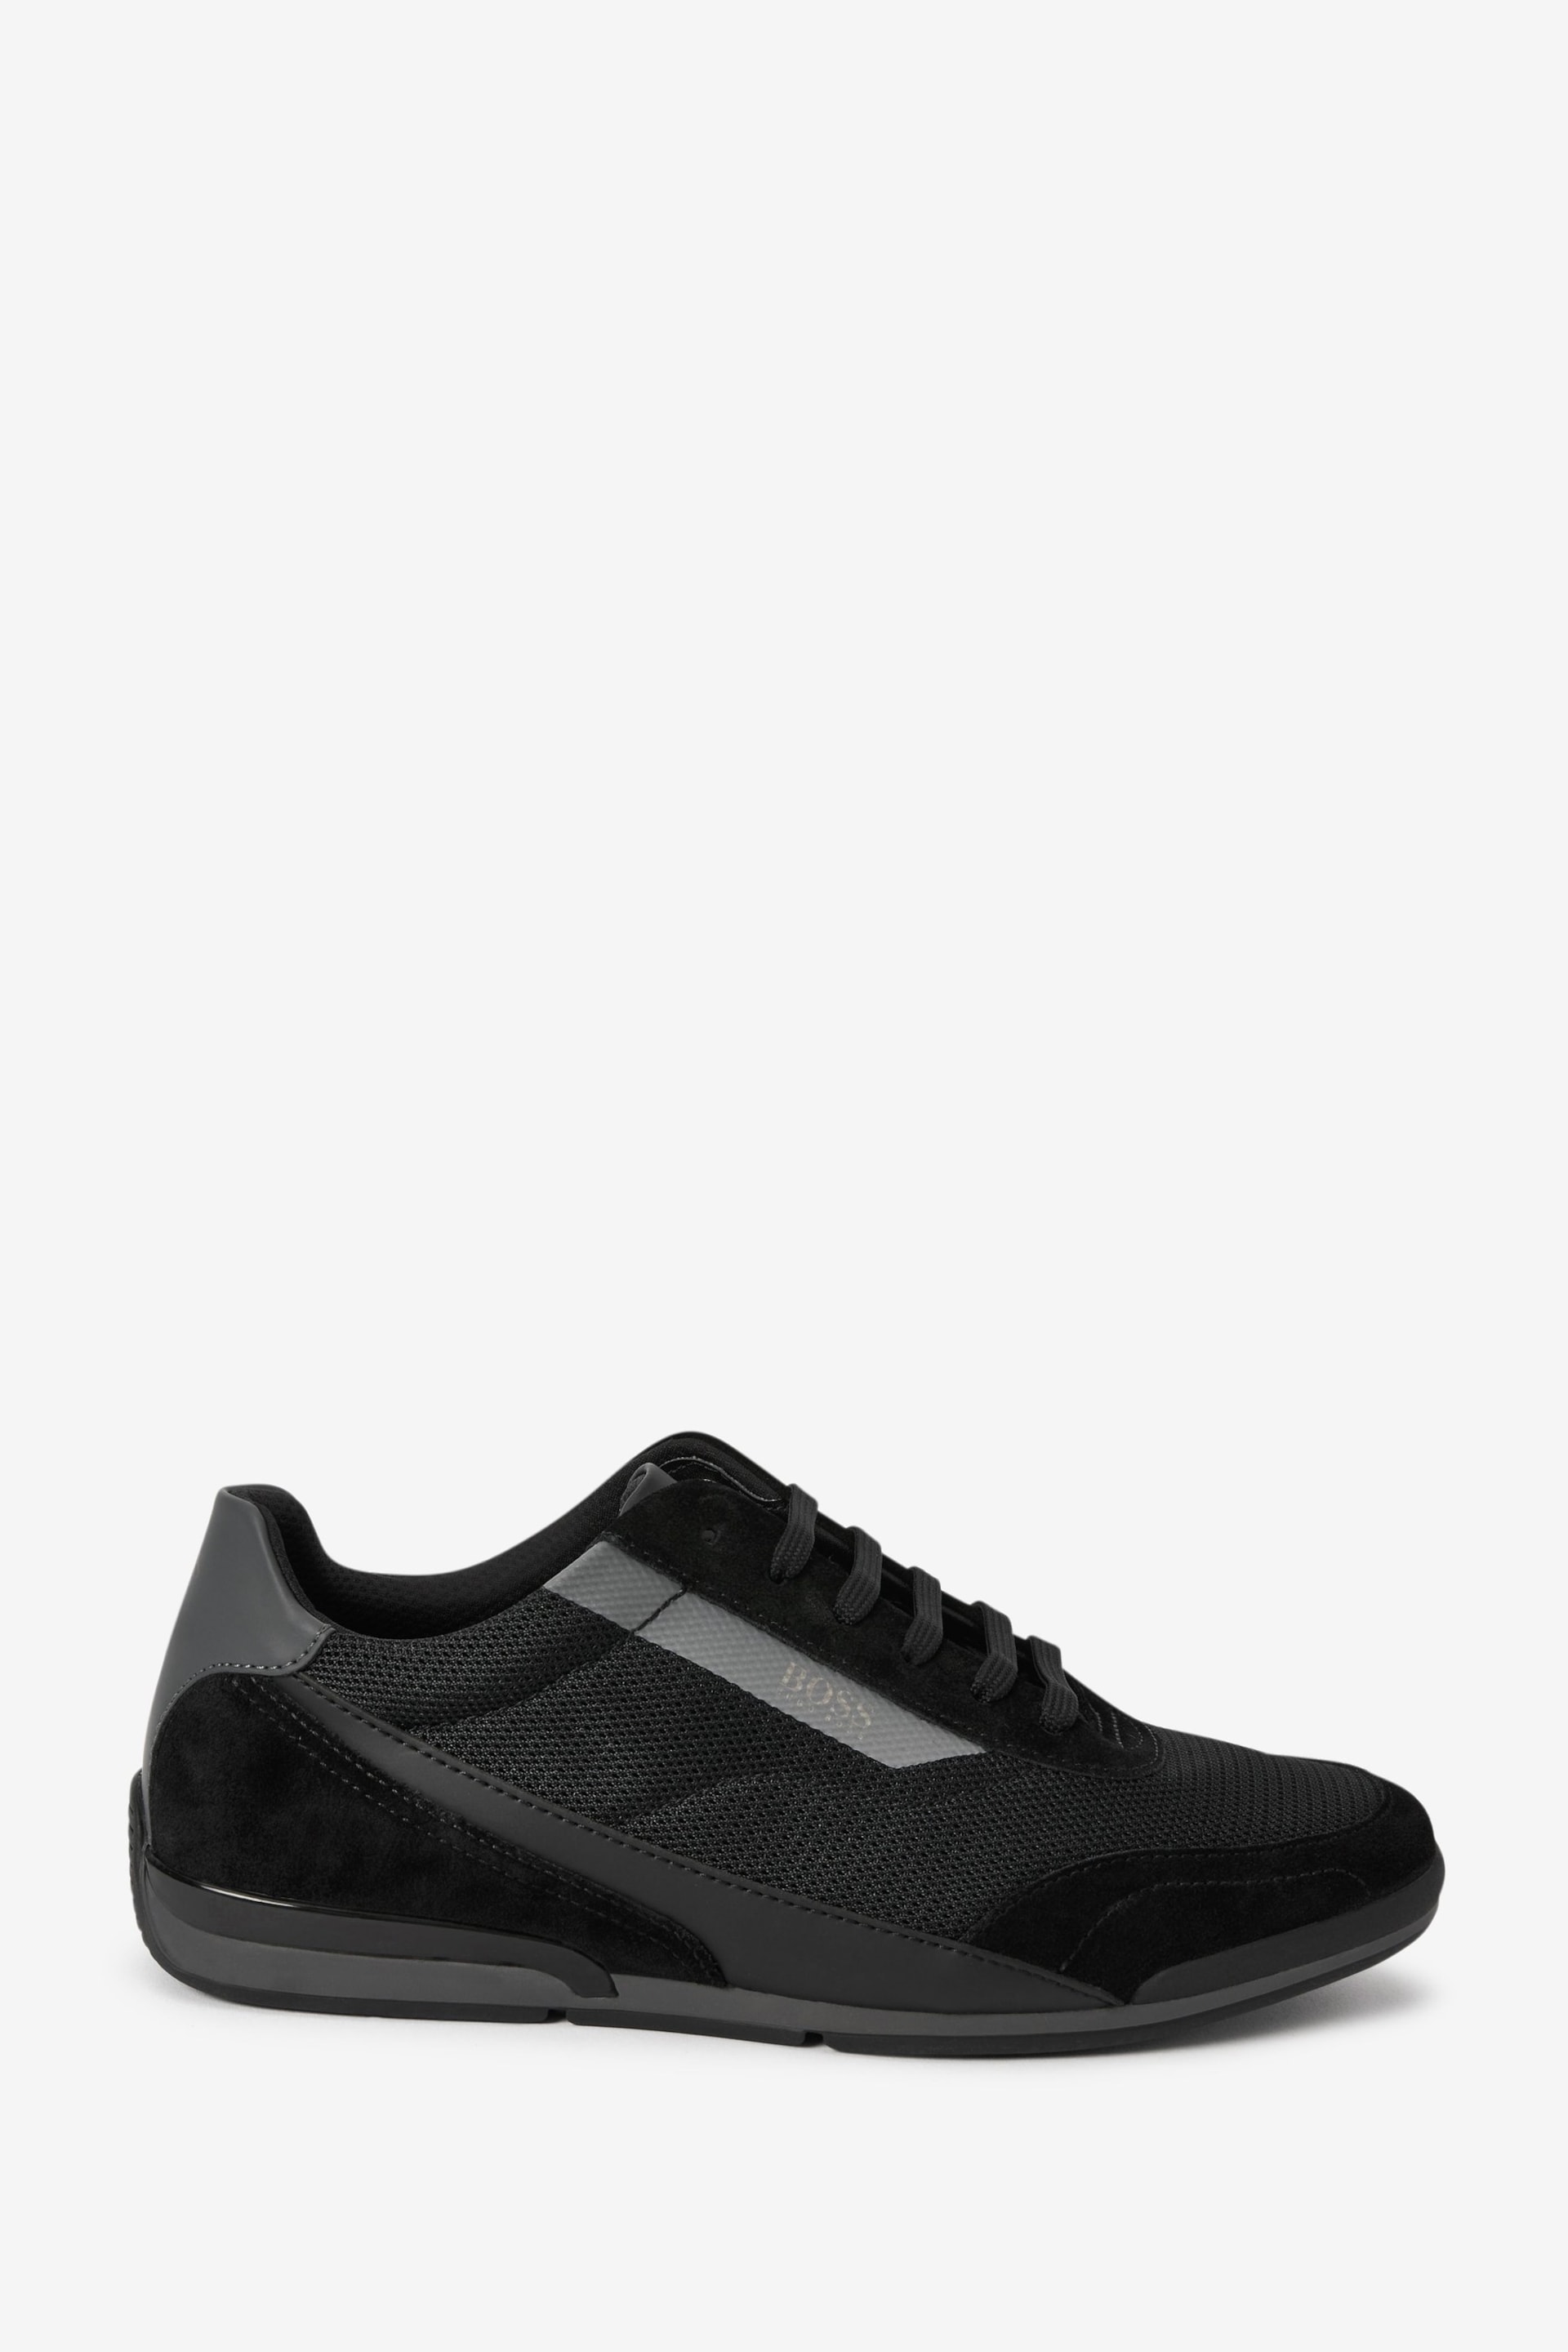 BOSS Black Saturn Trainers - Image 1 of 6